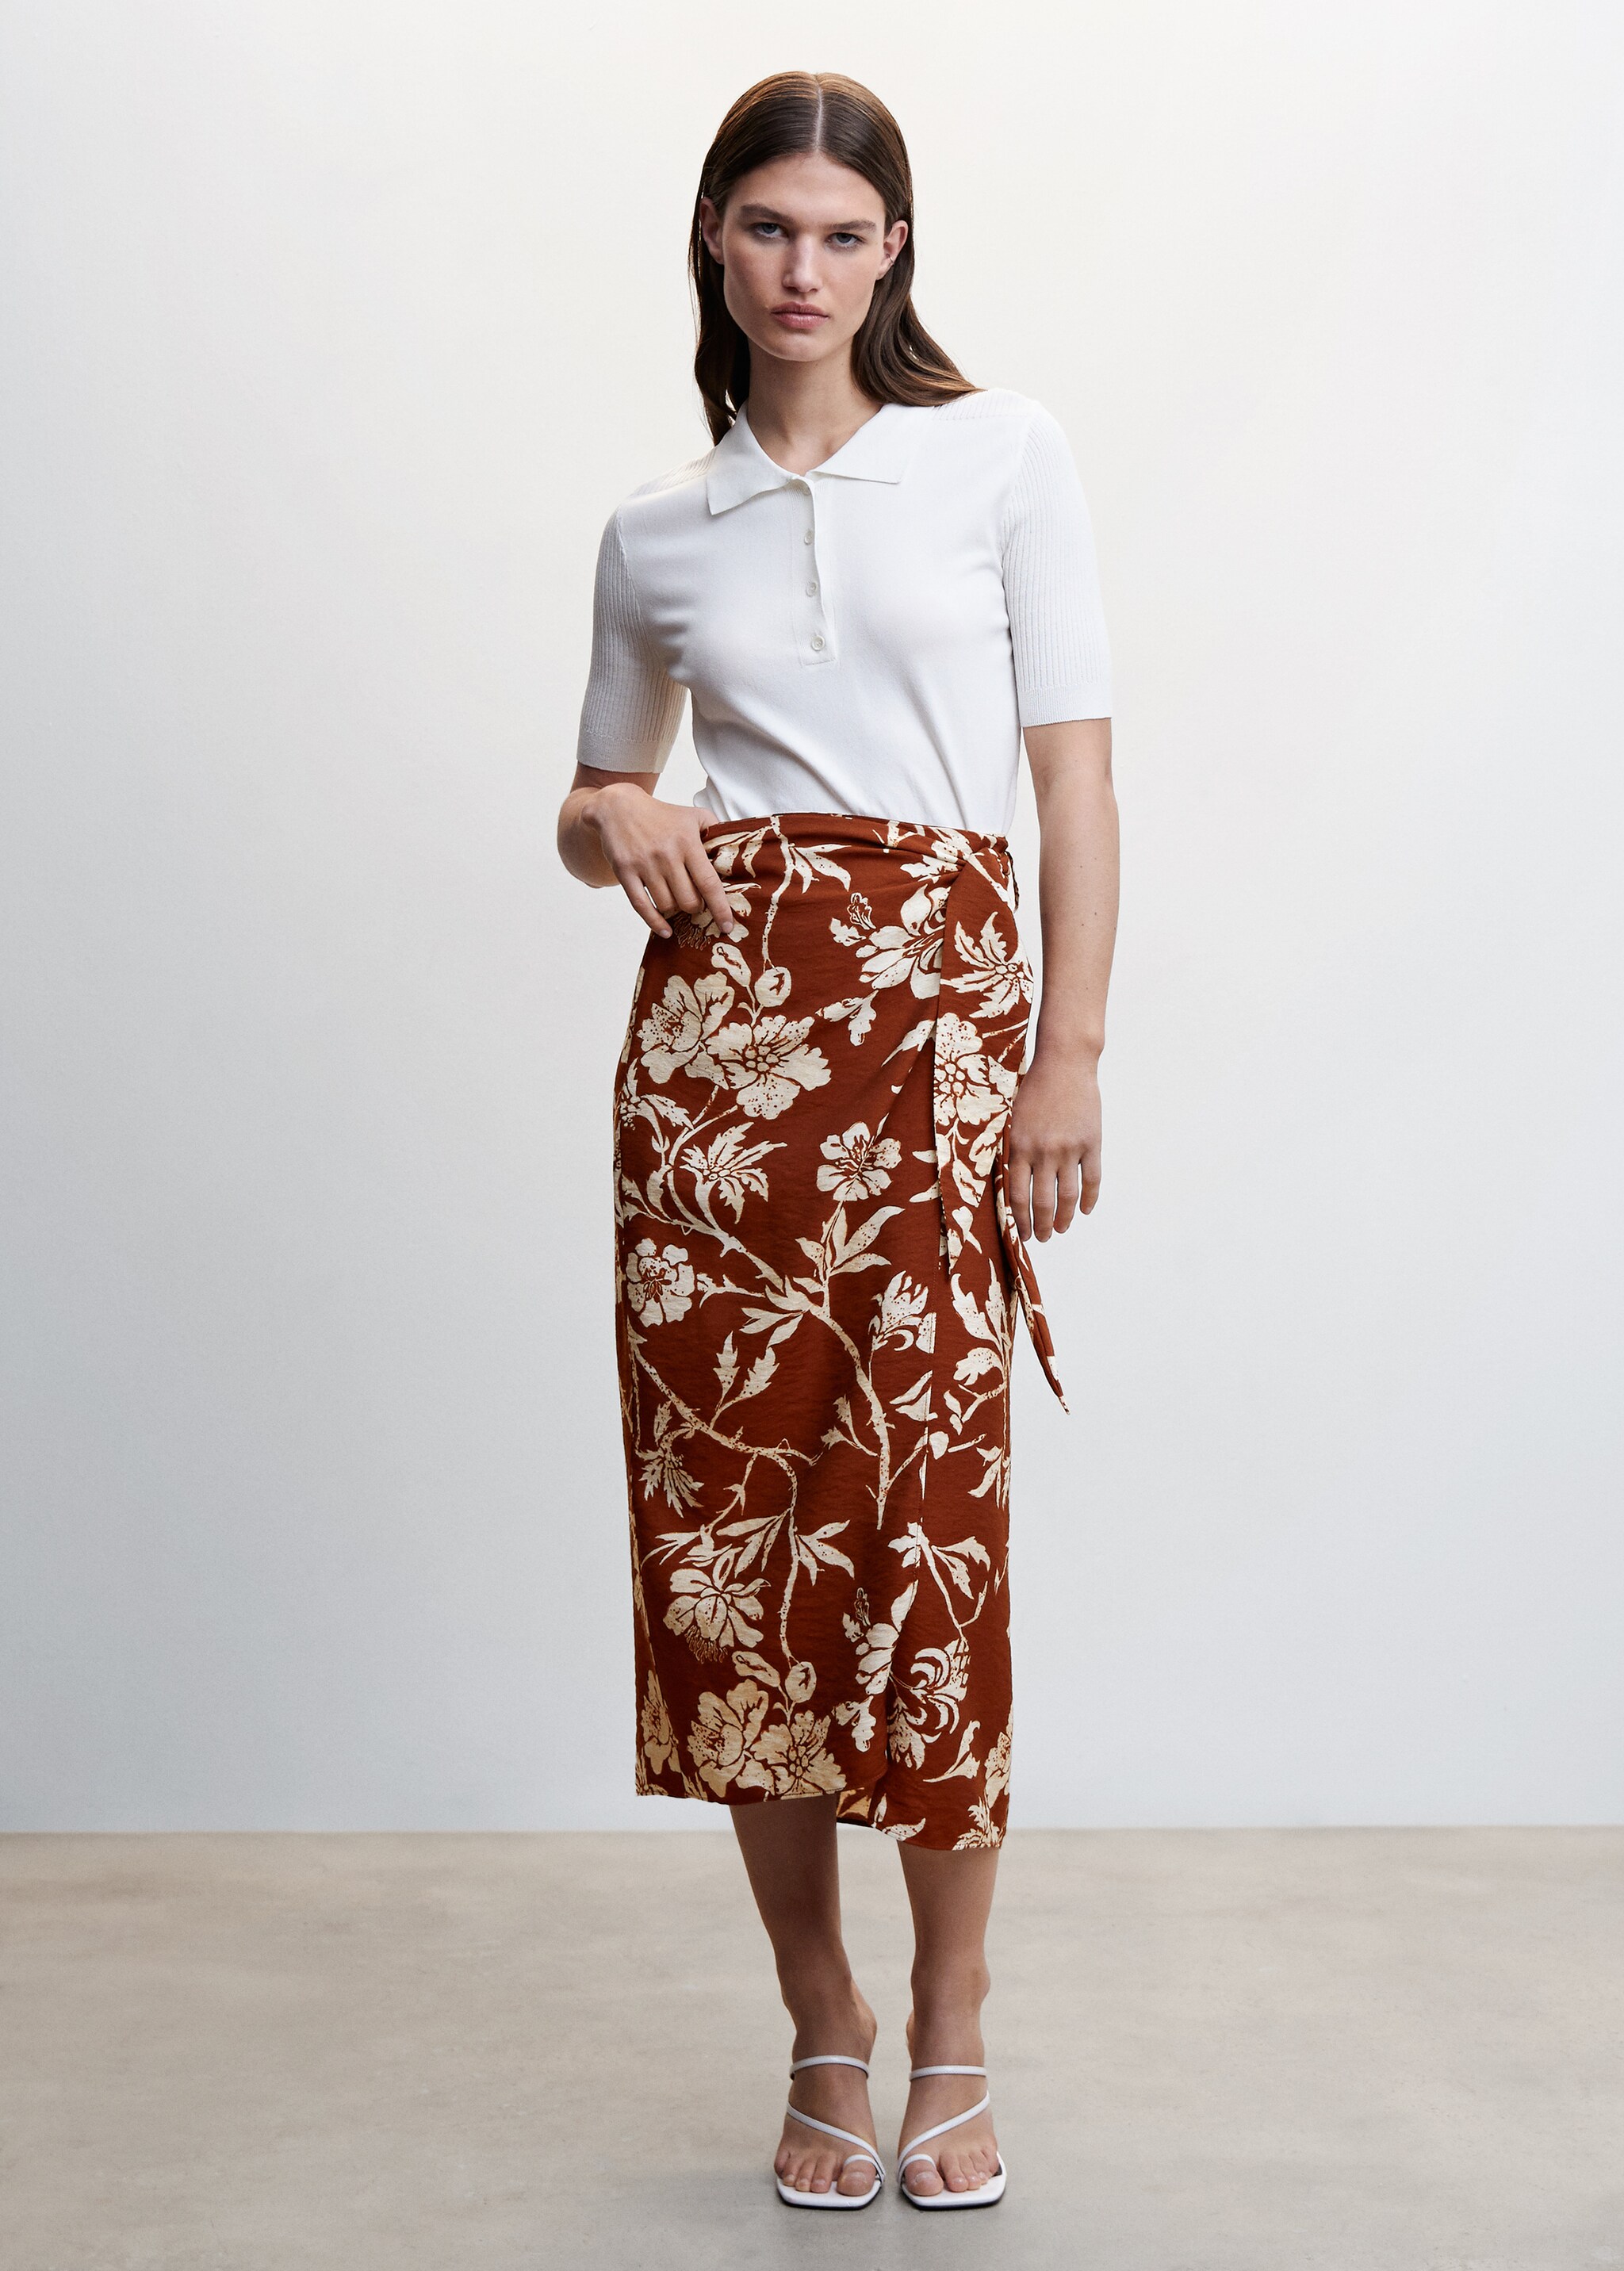 Floral wrapped skirt - General plane